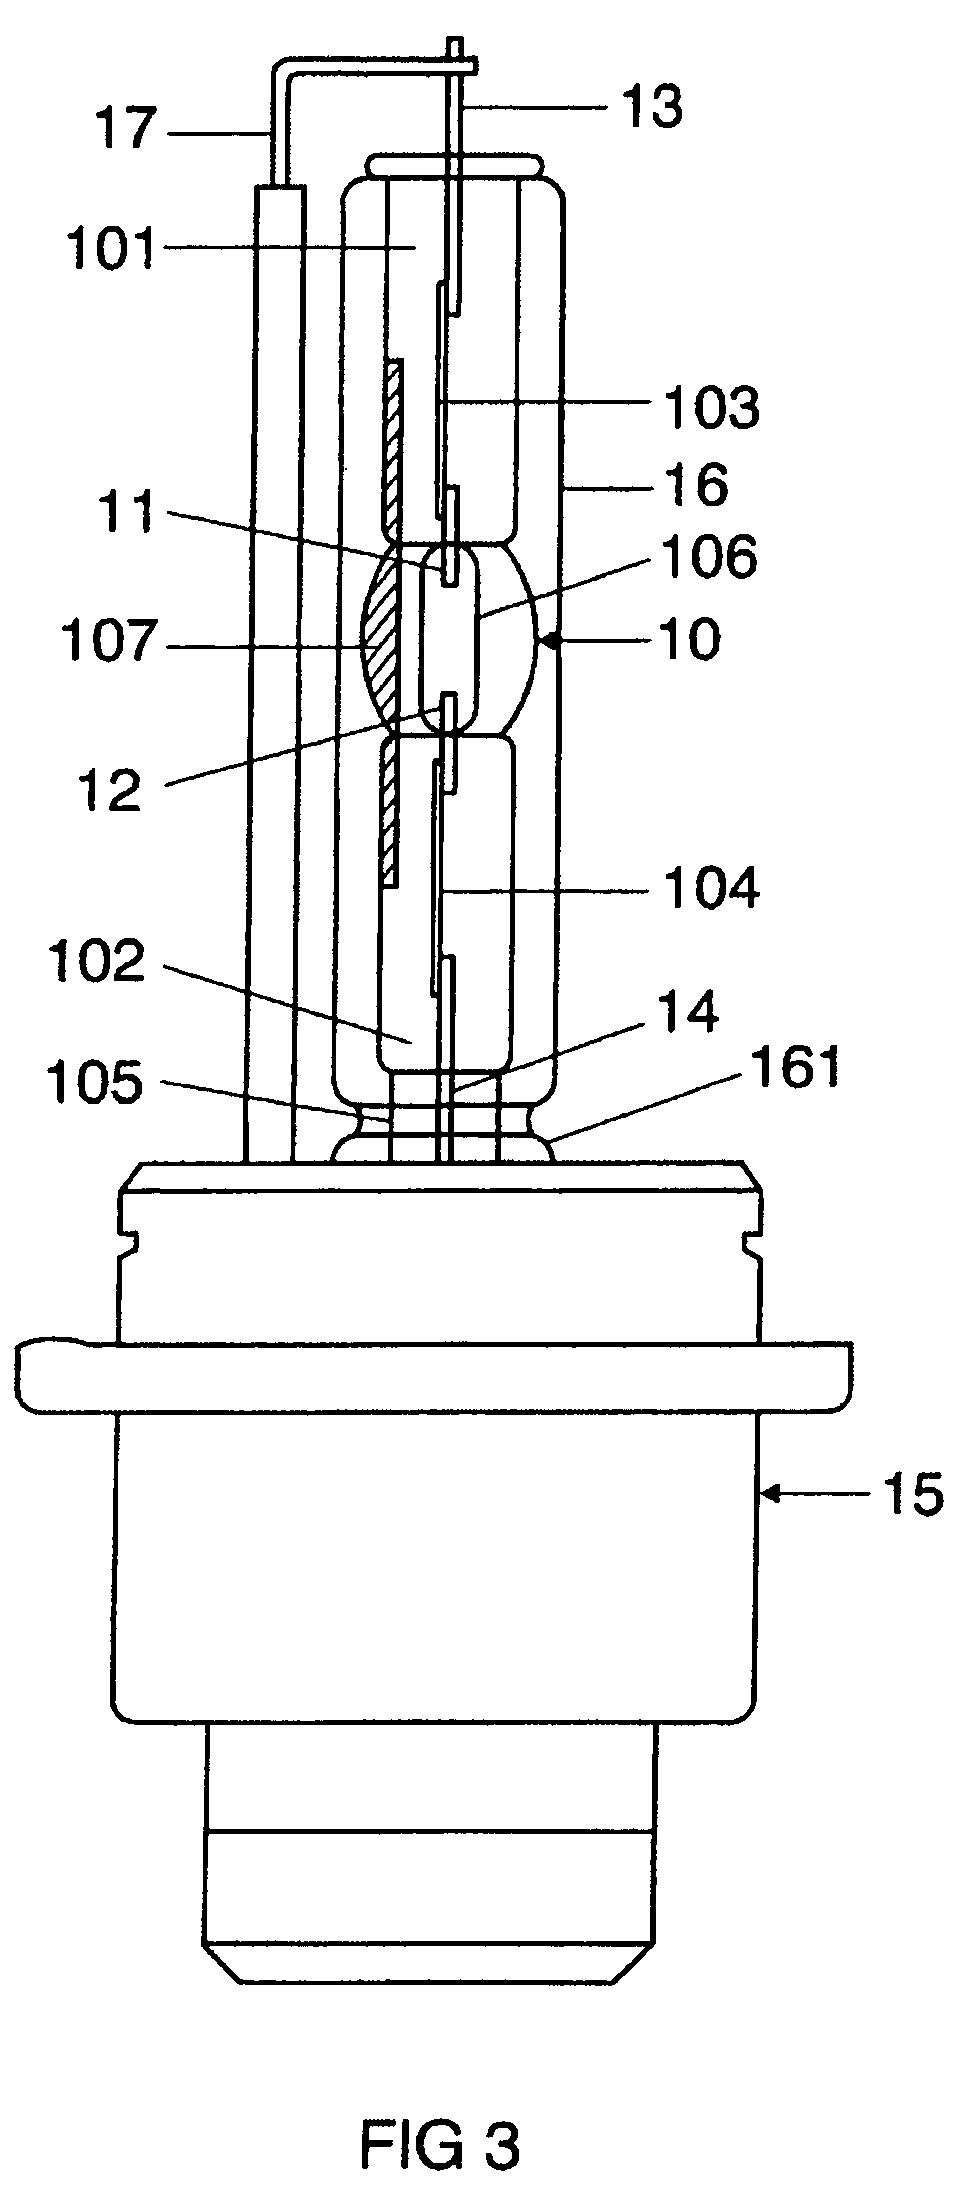 High-pressure discharge lamp having electrically conductive transparent coating